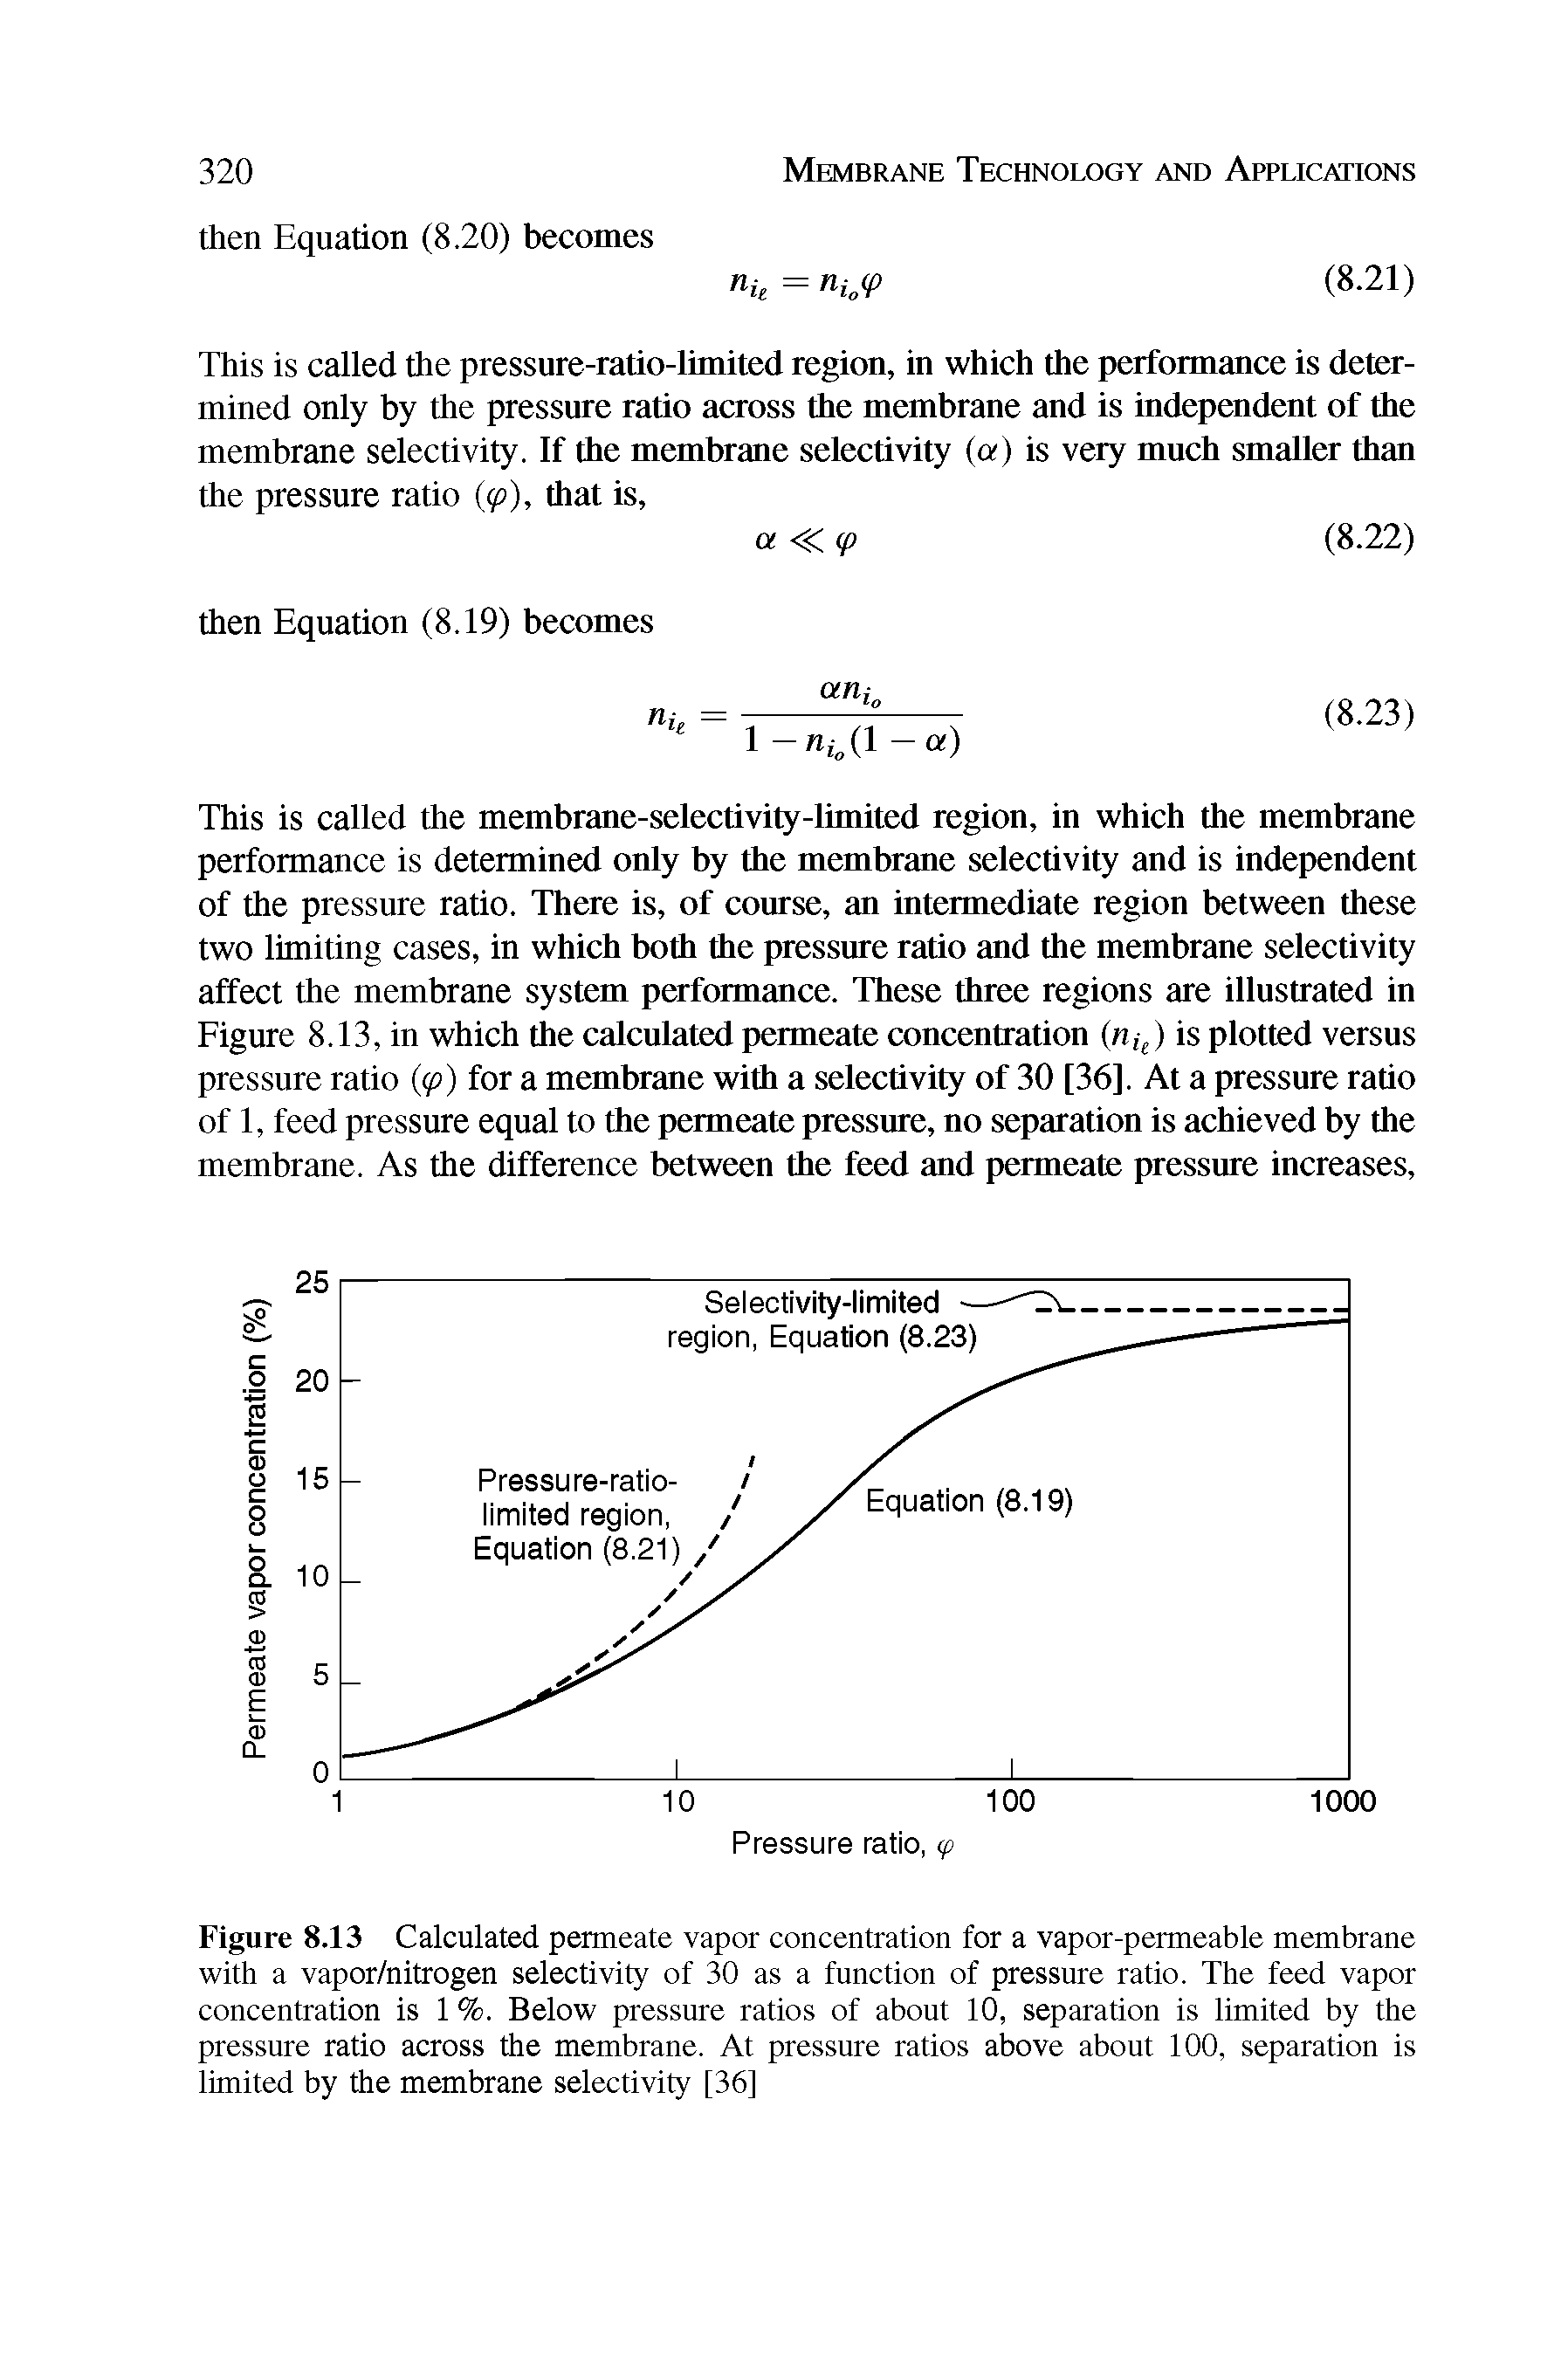 Figure 8.13 Calculated permeate vapor concentration for a vapor-permeable membrane with a vapor/nitrogen selectivity of 30 as a function of pressure ratio. The feed vapor concentration is 1 %. Below pressure ratios of about 10, separation is limited by the pressure ratio across the membrane. At pressure ratios above about 100, separation is limited by the membrane selectivity [36]...